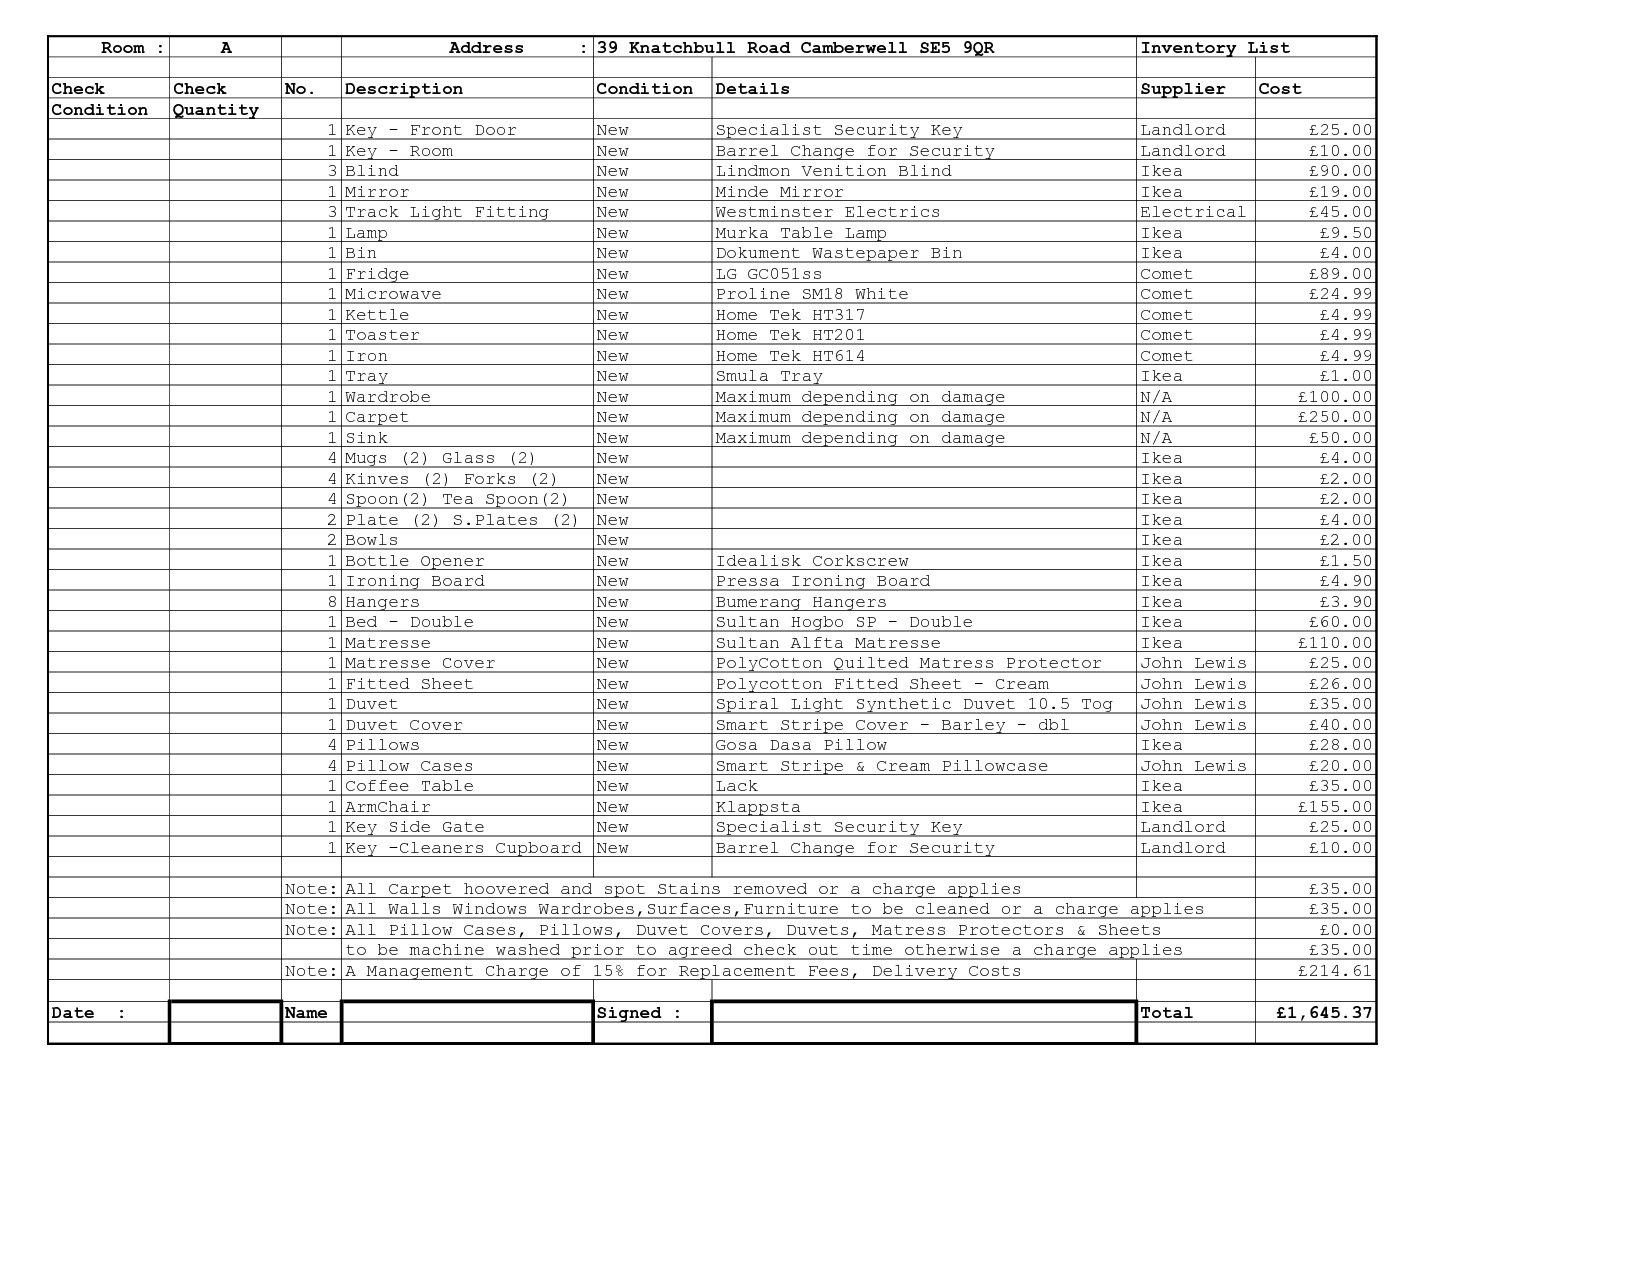 free inventory spreadsheet template